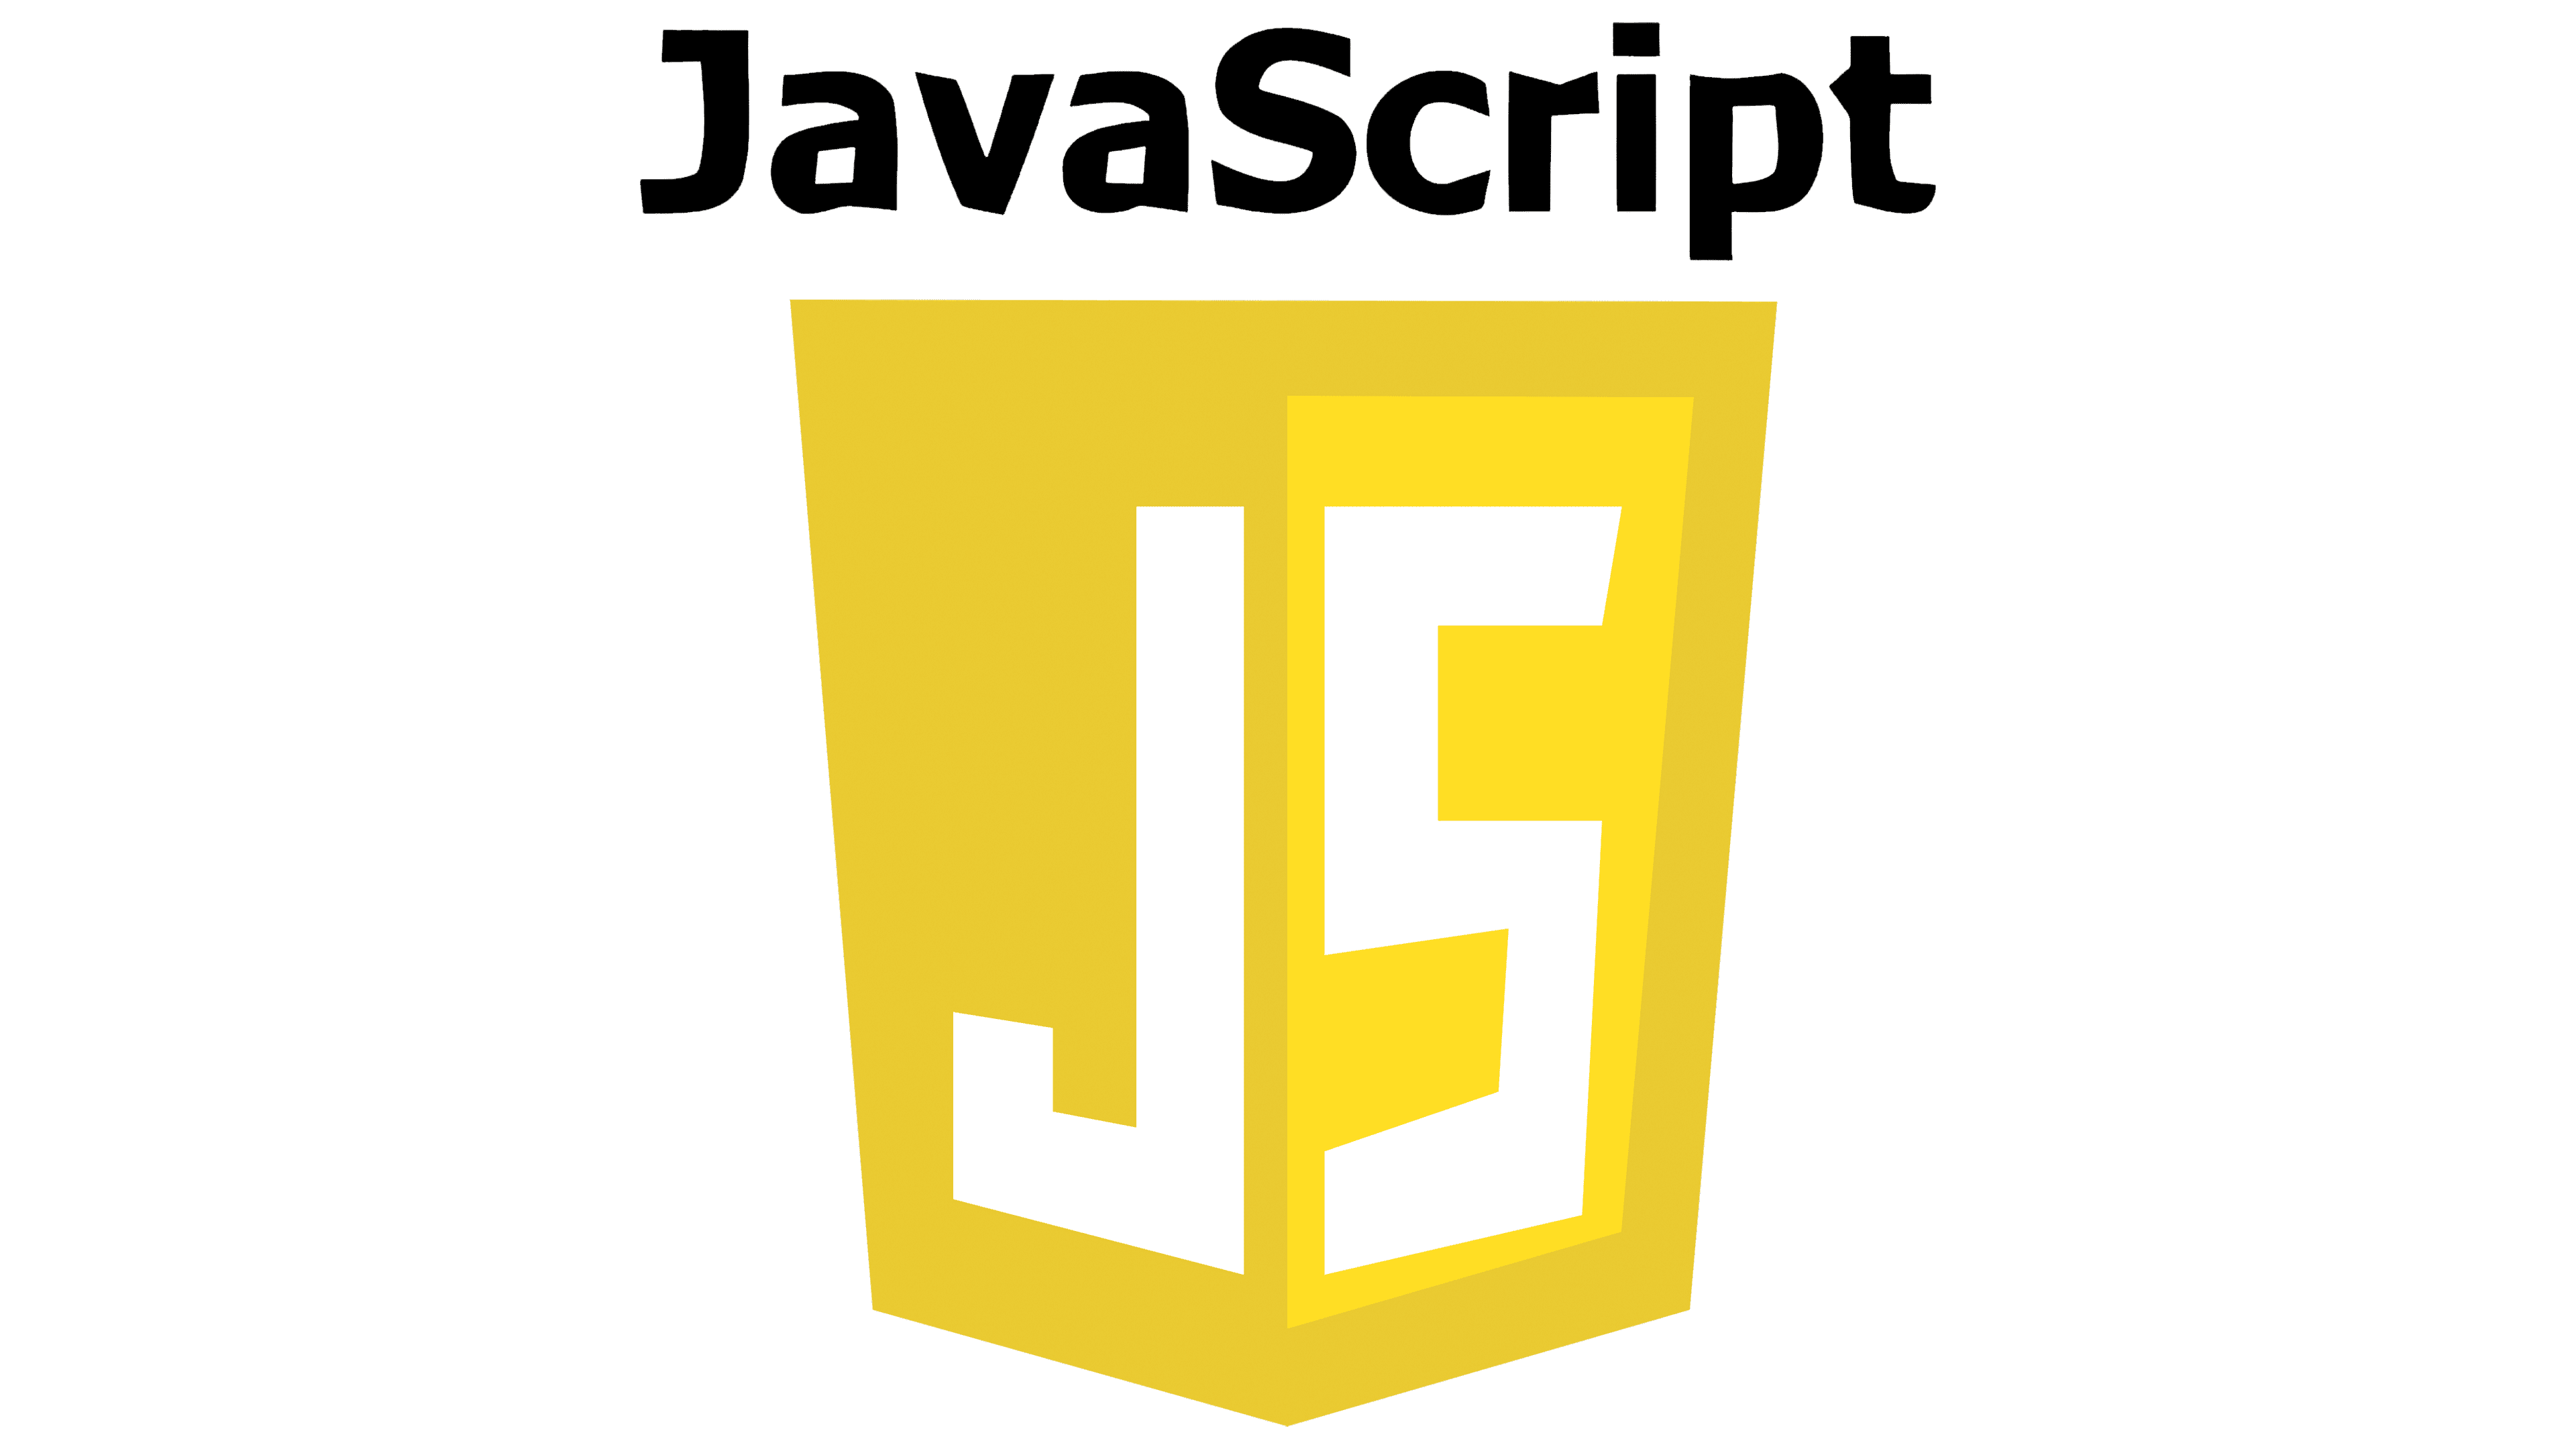 JS logo in yellow and white colour